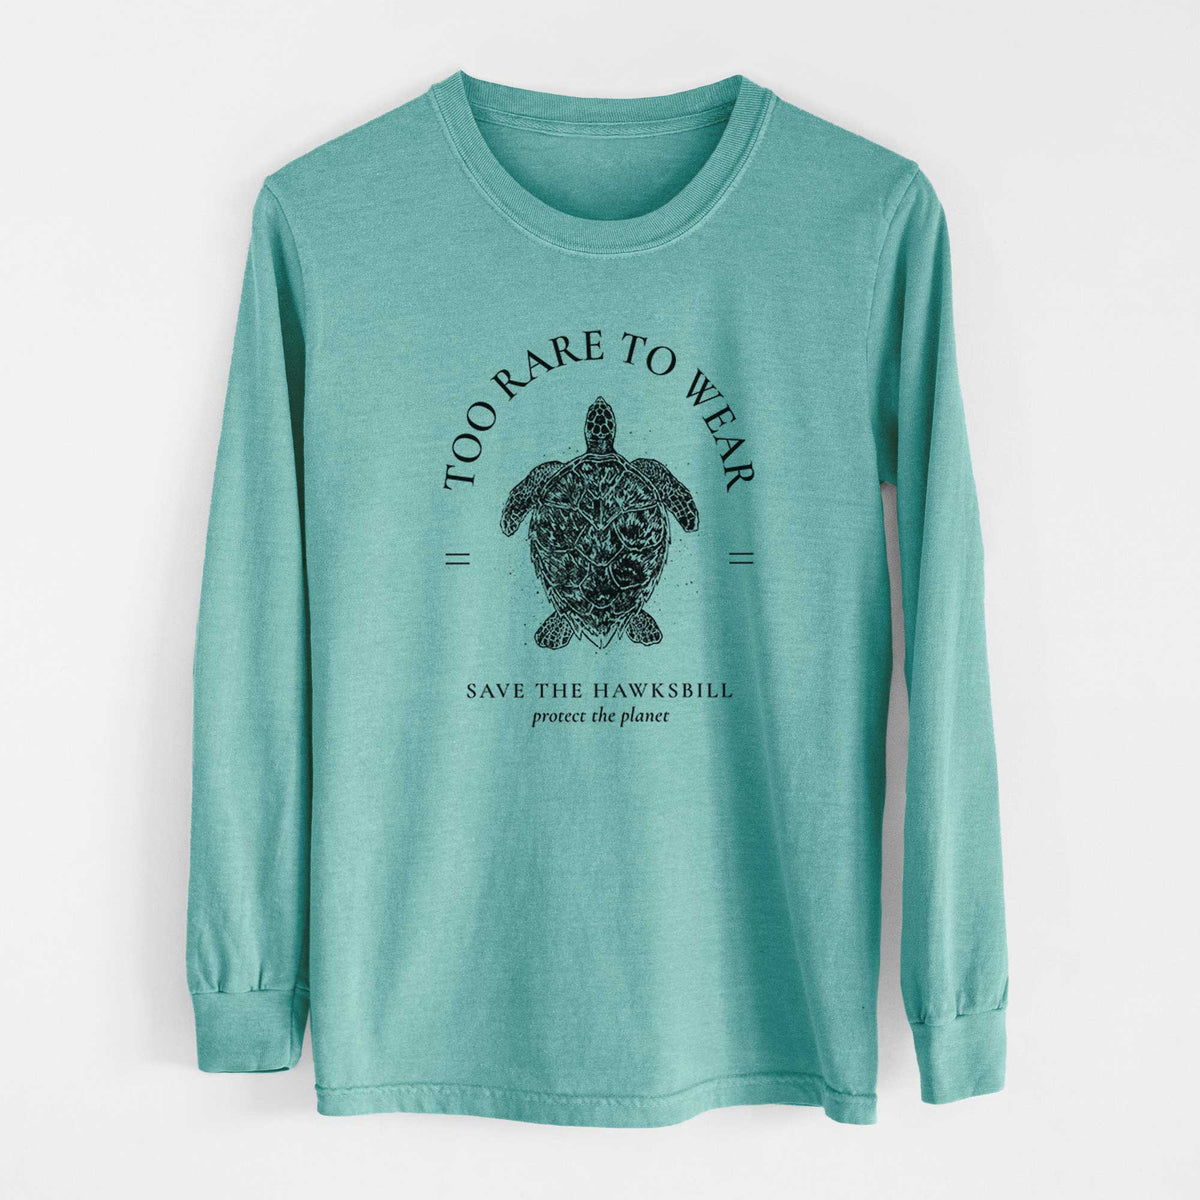 Too Rare to Wear - Save the Hawksbill - Heavyweight 100% Cotton Long Sleeve